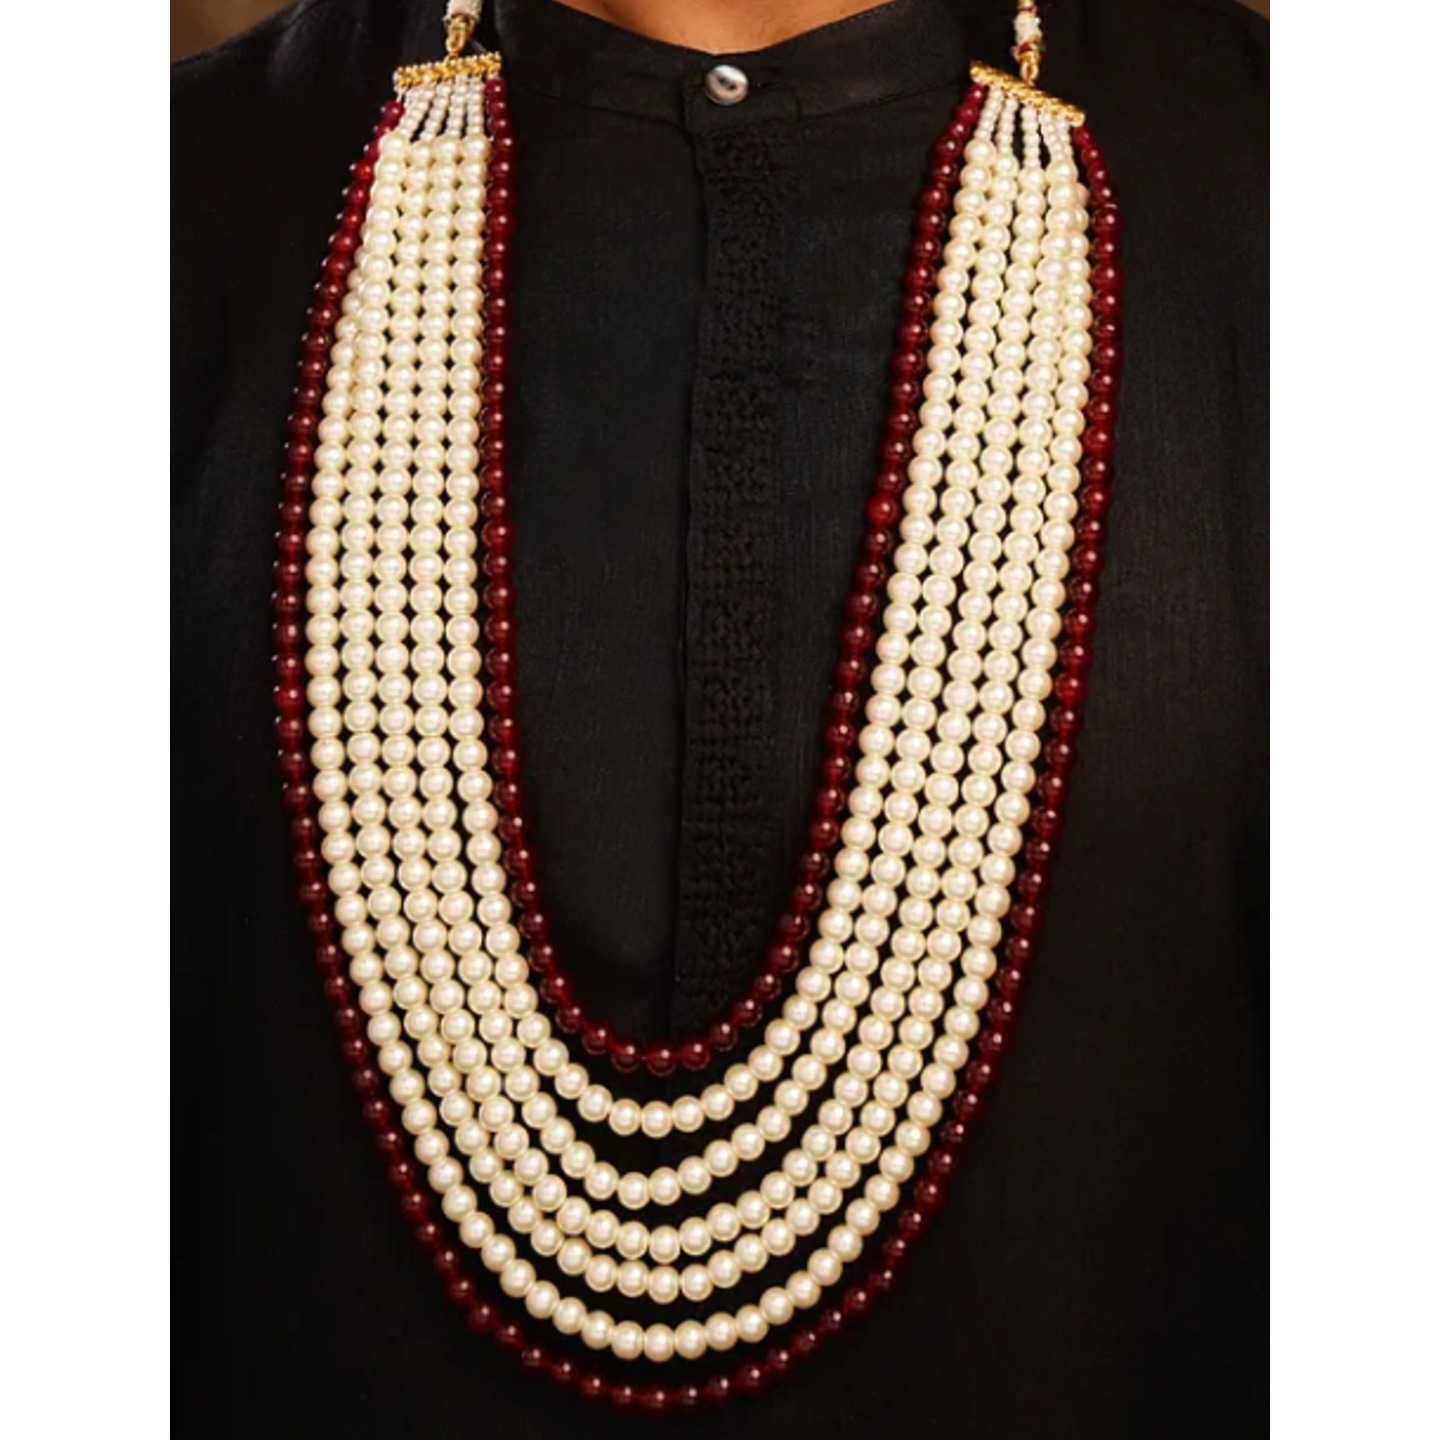 Maroon White Beaded Layered Necklace For Men